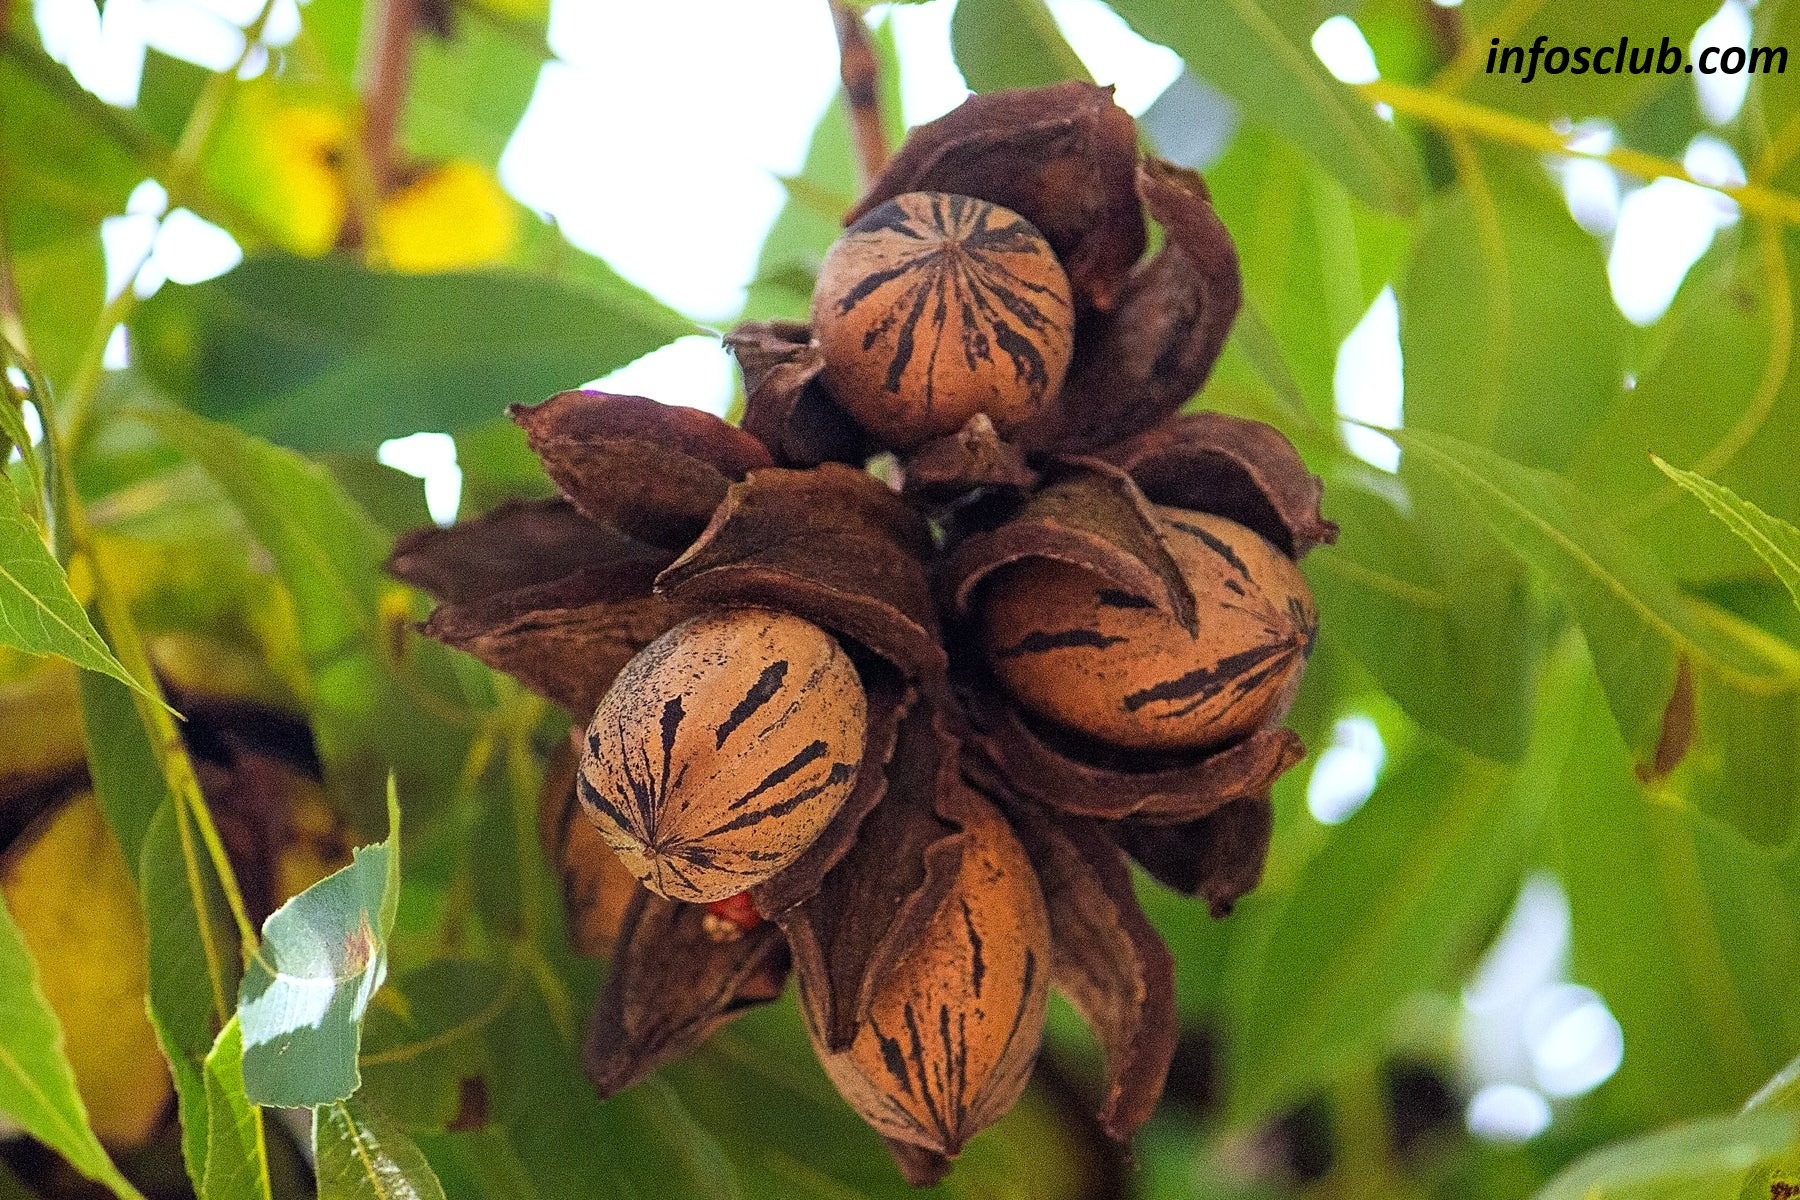 Pecans | How To Add Pecans To Your Diet, Benefits, Nutrition